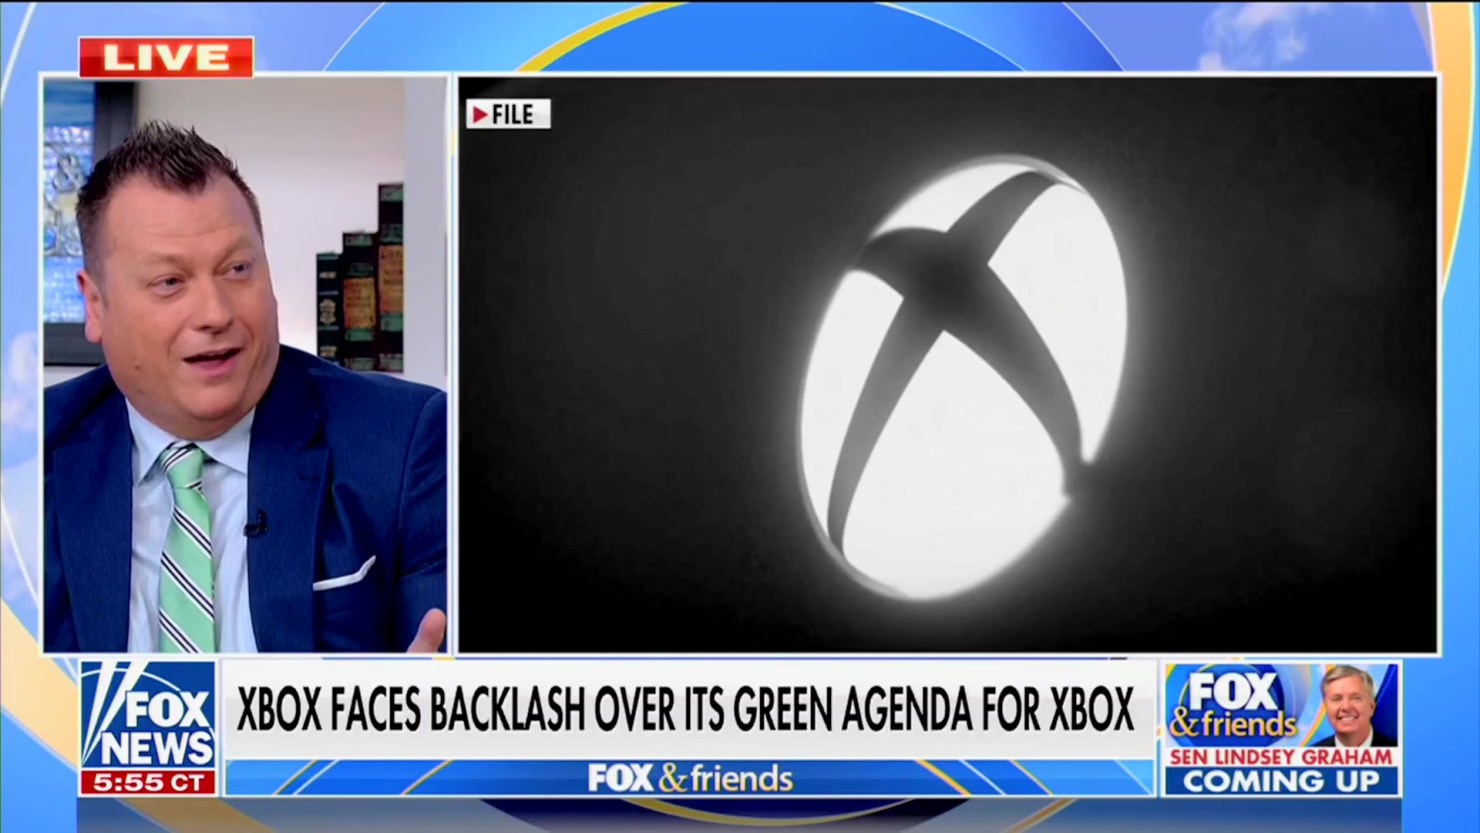 Fox News is flipping the Xbox “Woke” because everything is stupid